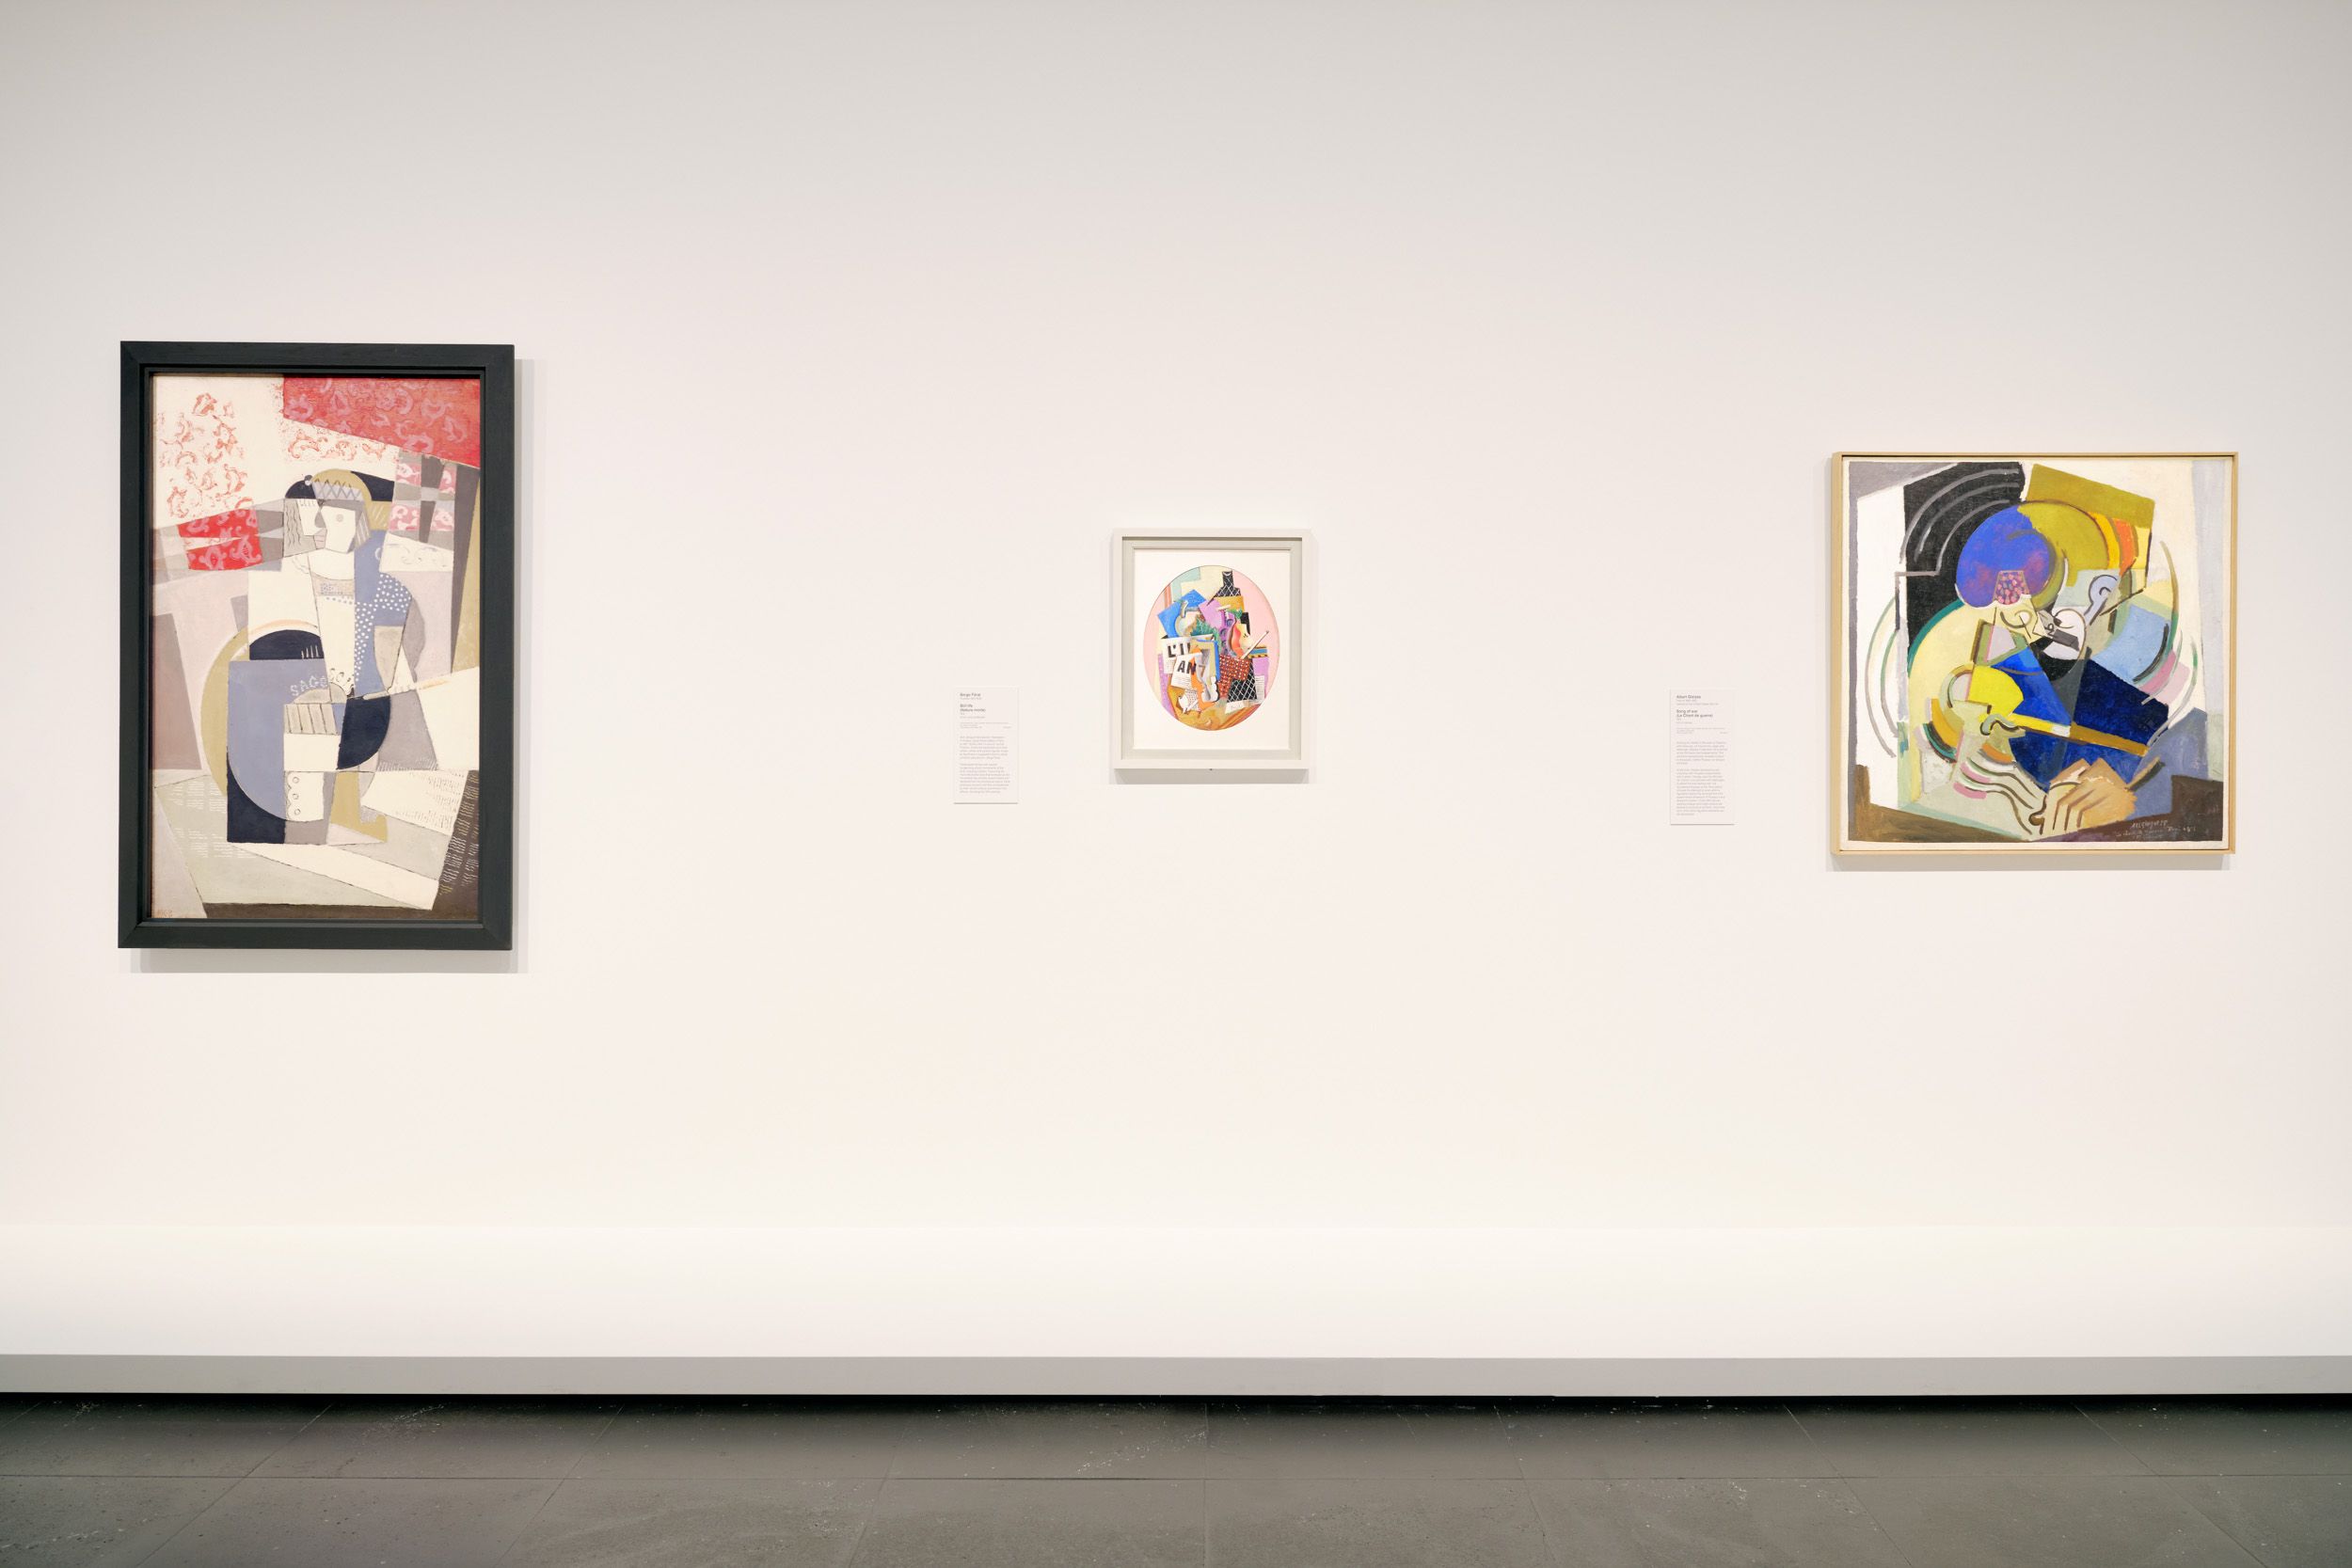 Installation view of <em>The Picasso Century</em> on display from 10 June-9 October 2022 at NGV International, Melbourne. Photo: Tom Ross